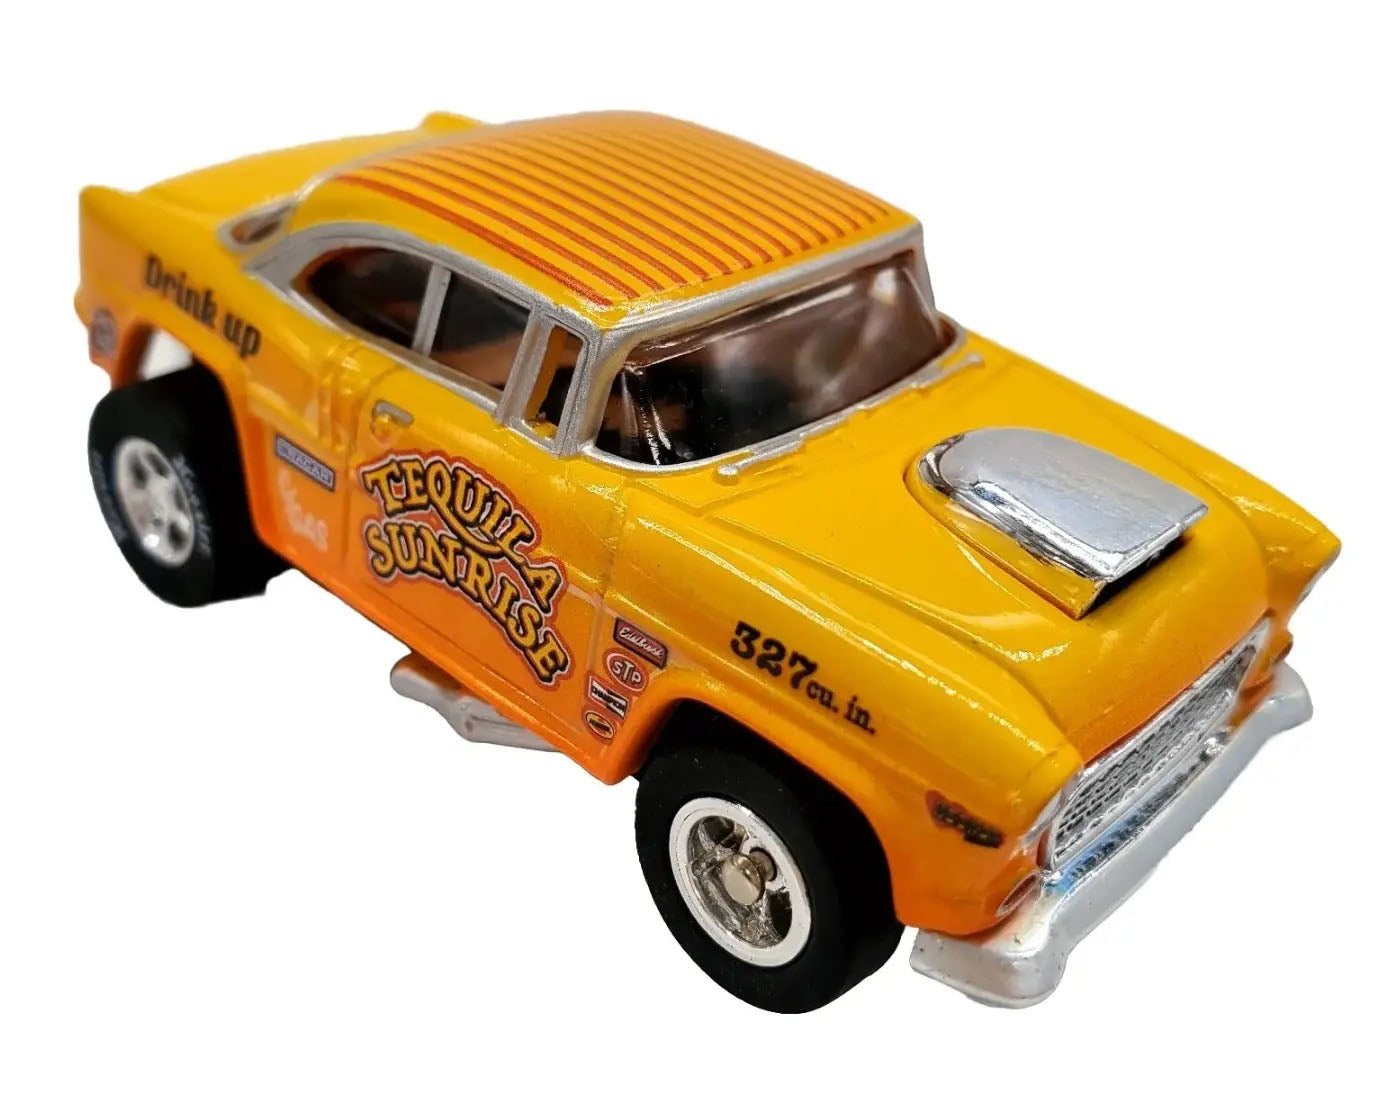 Auto World Exclusive 1955 Chevy Bel Air Tequila Sunrise HO Slot Car for AFX - PowerHobby